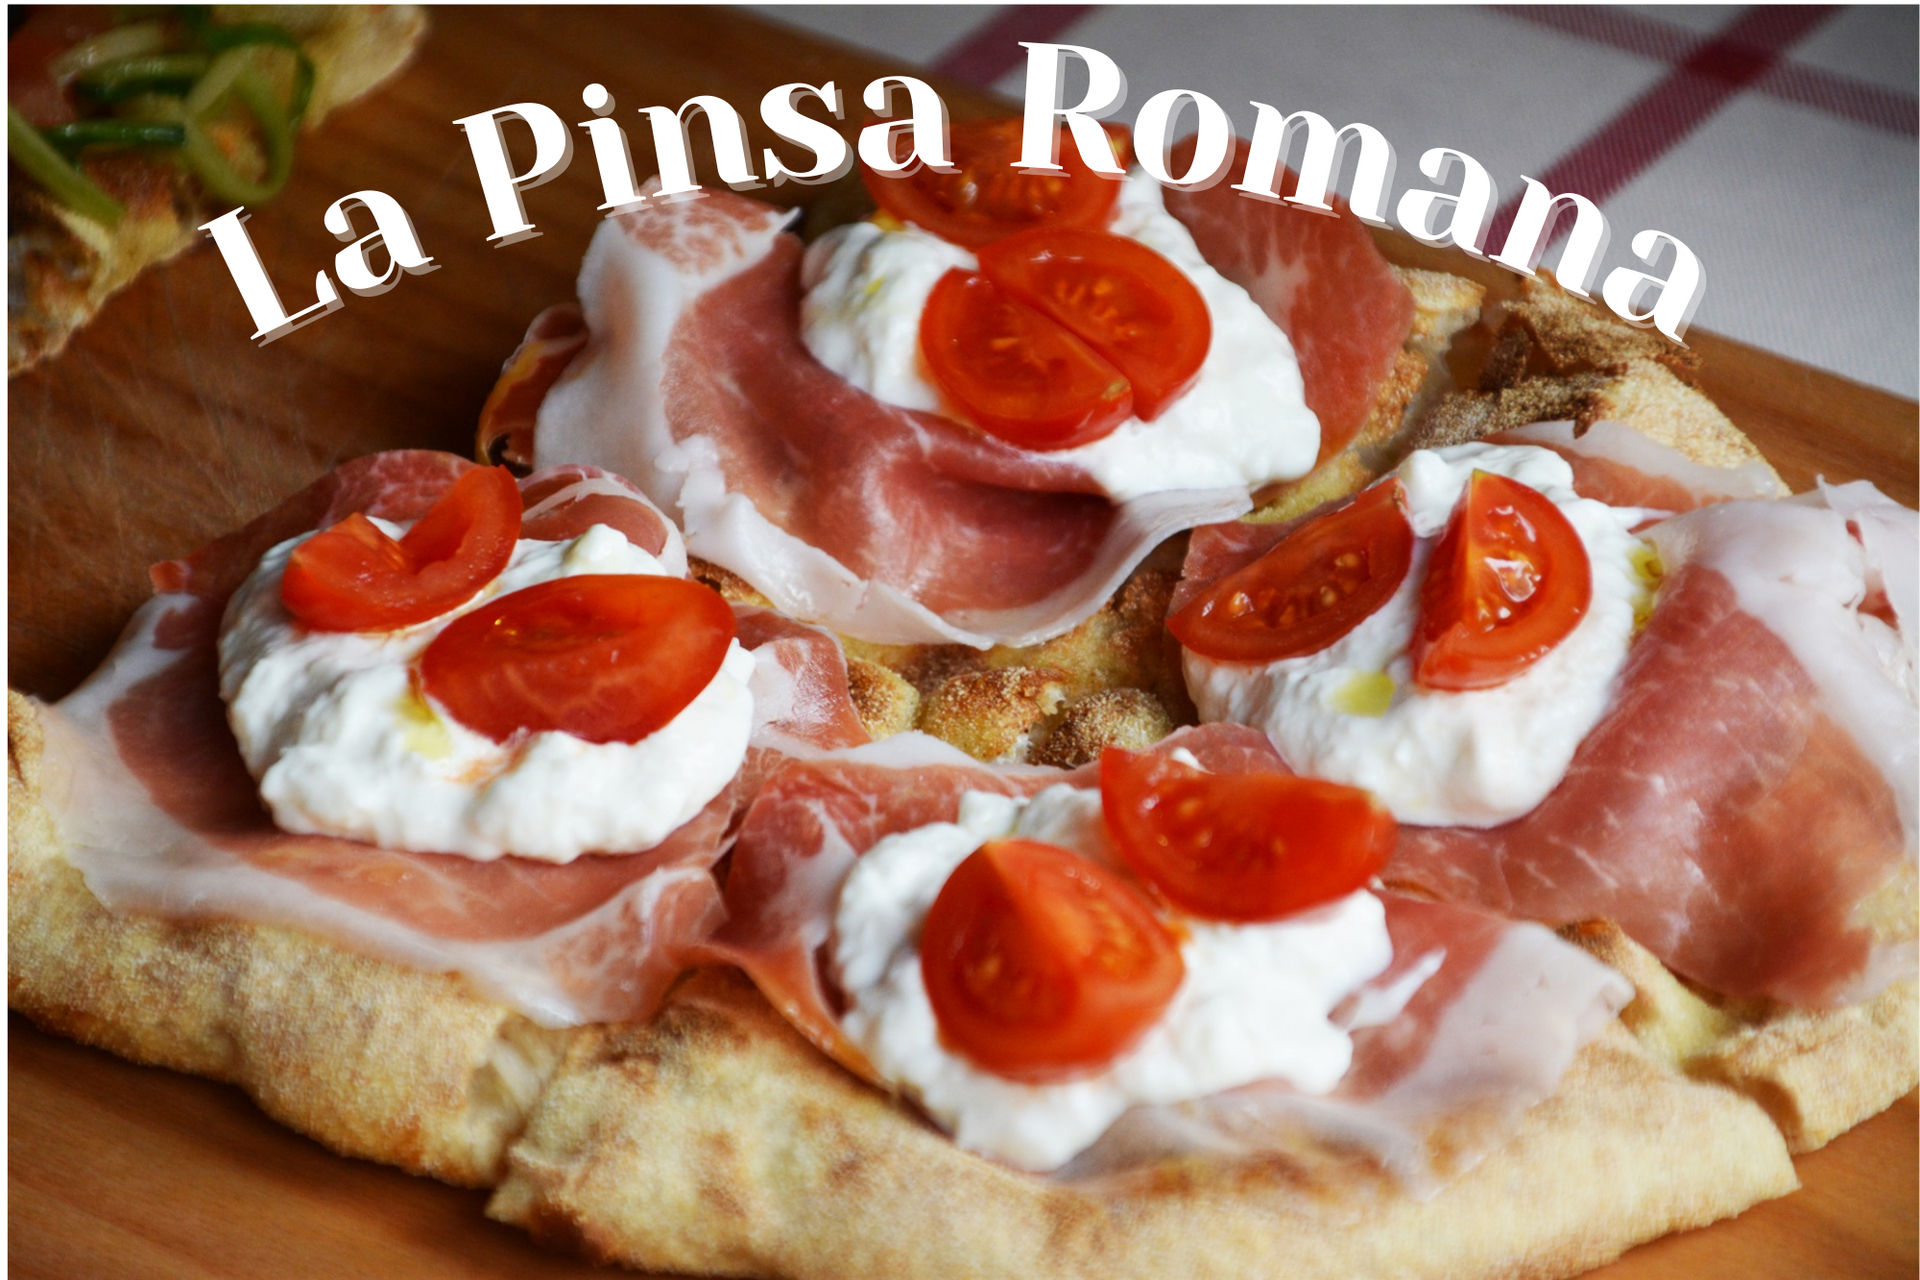 billig produzieren All you need to Magnifico Romana about Food – know Pinsa